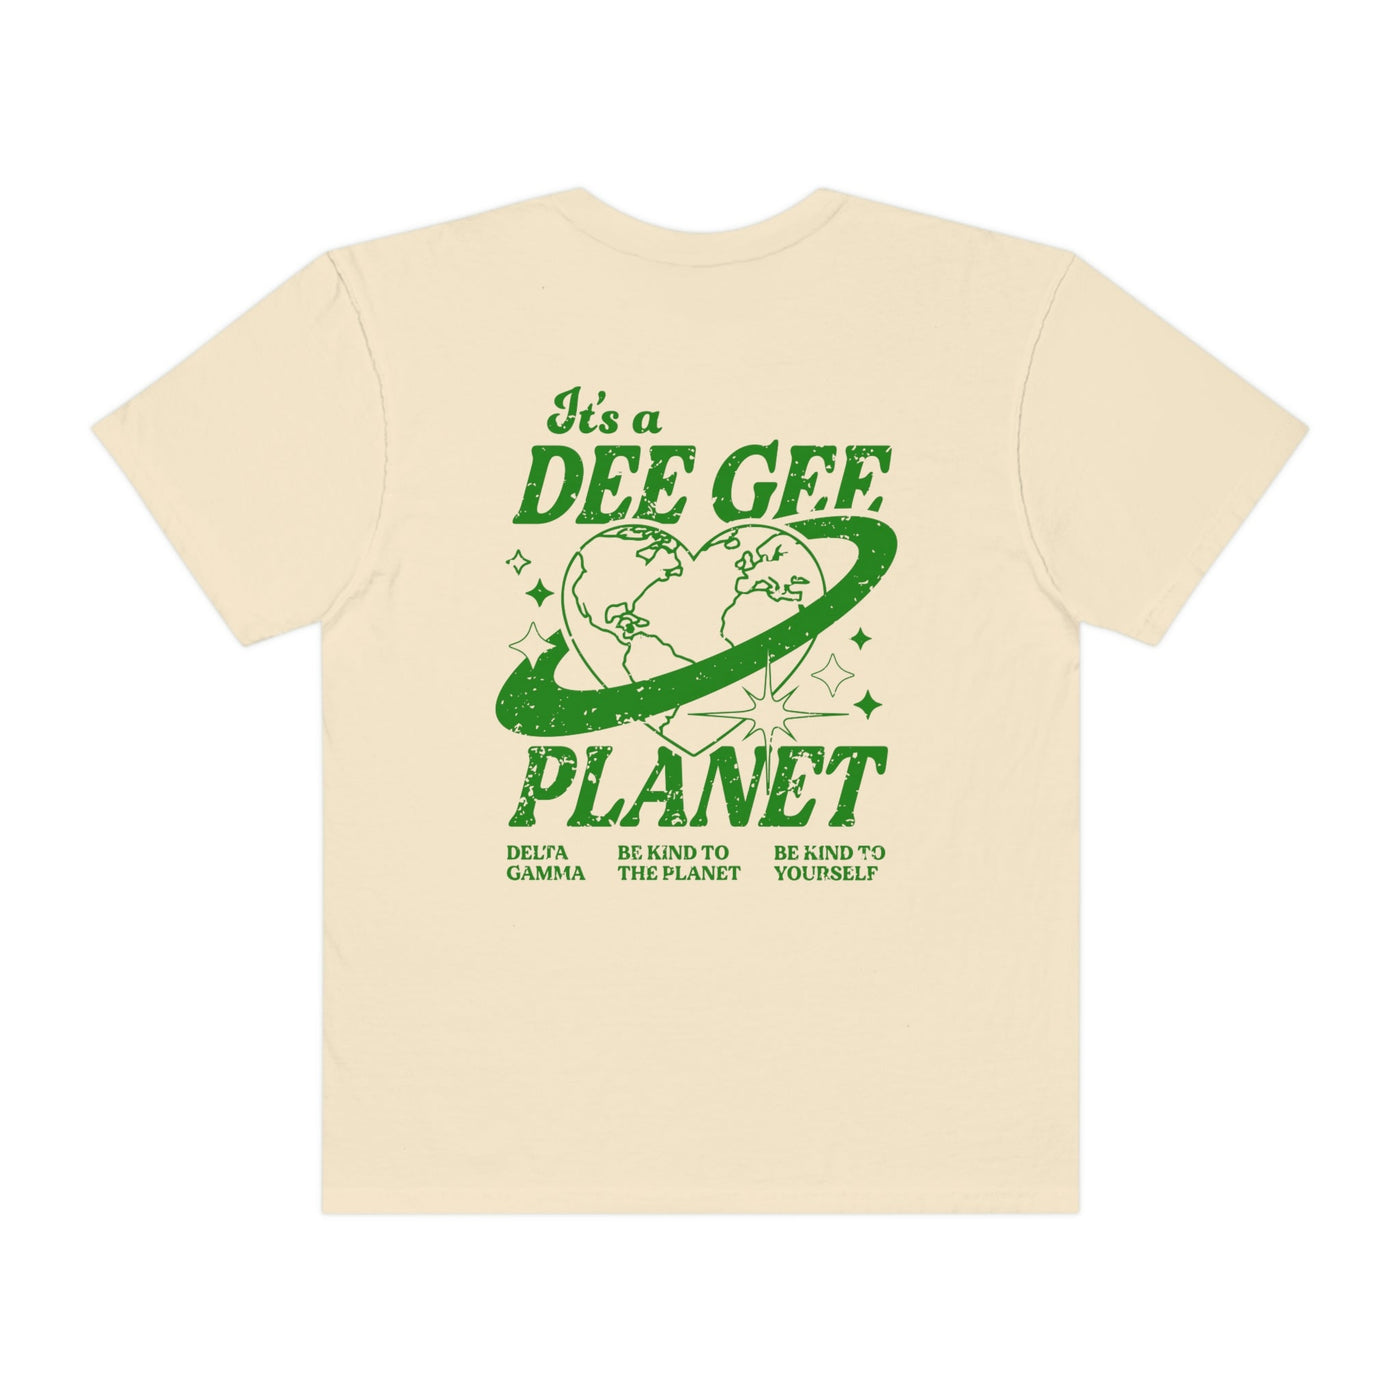 Delta Gamma Planet T-shirt | Be Kind to the Planet Trendy Sorority shirt